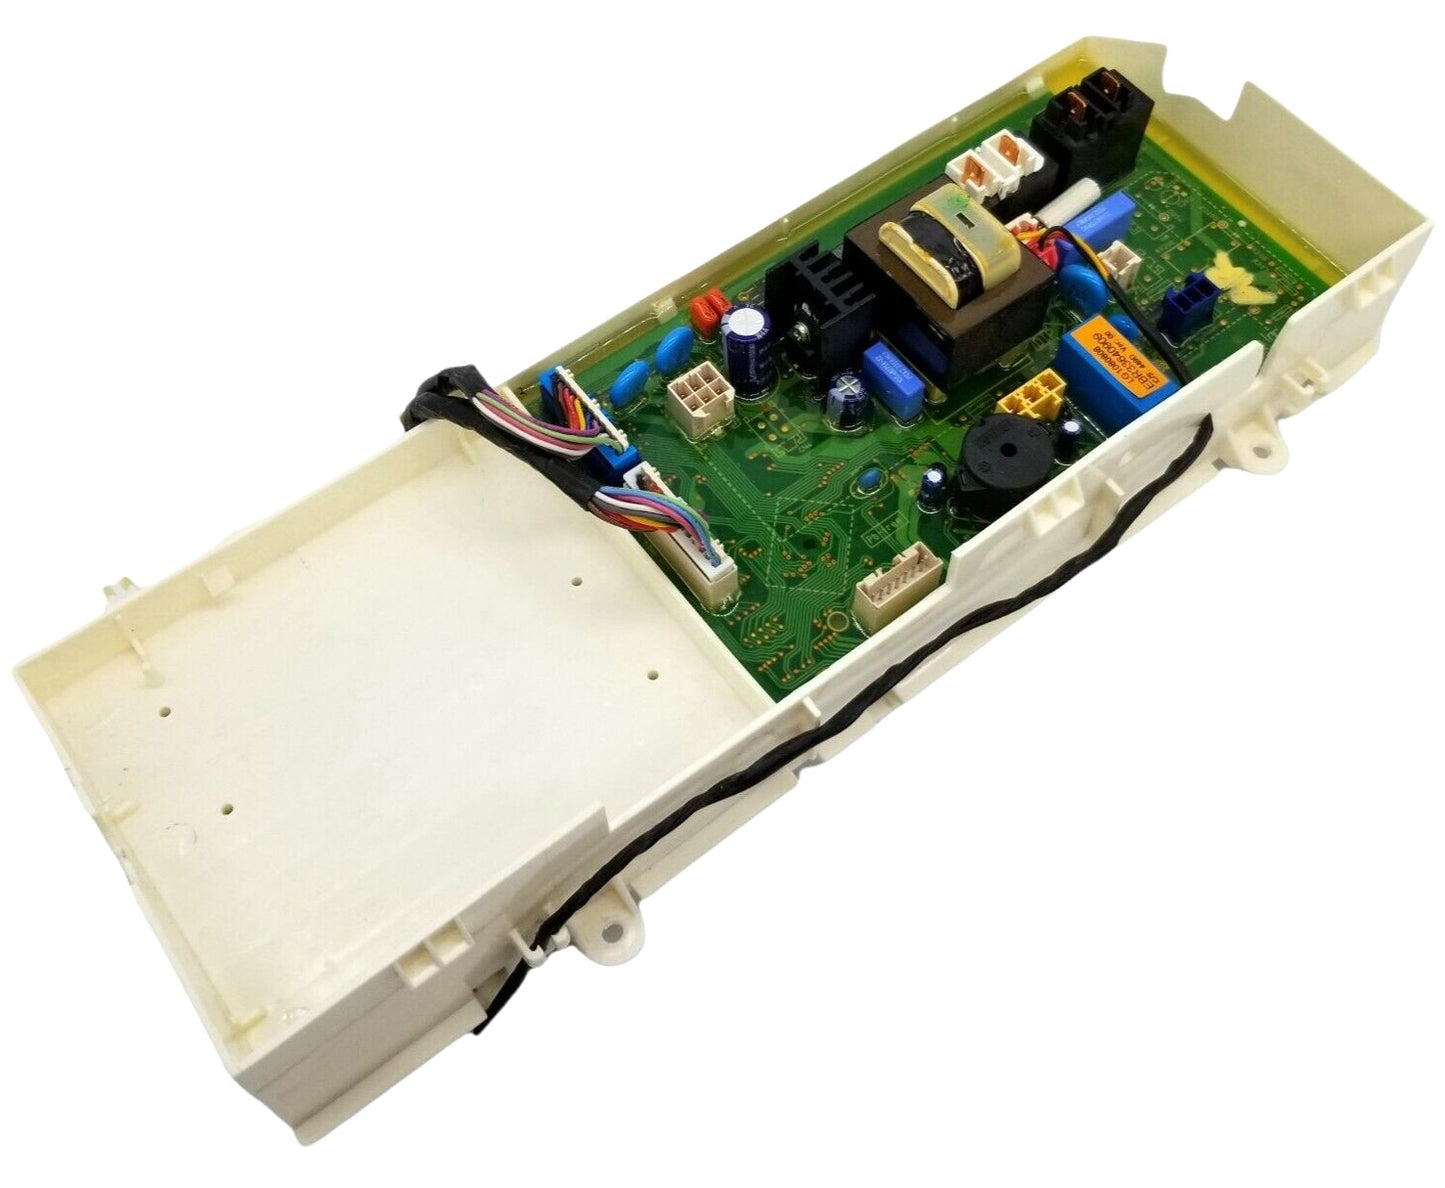 OEM Replacement for Kenmore Dryer Control Board EBR33640909 -